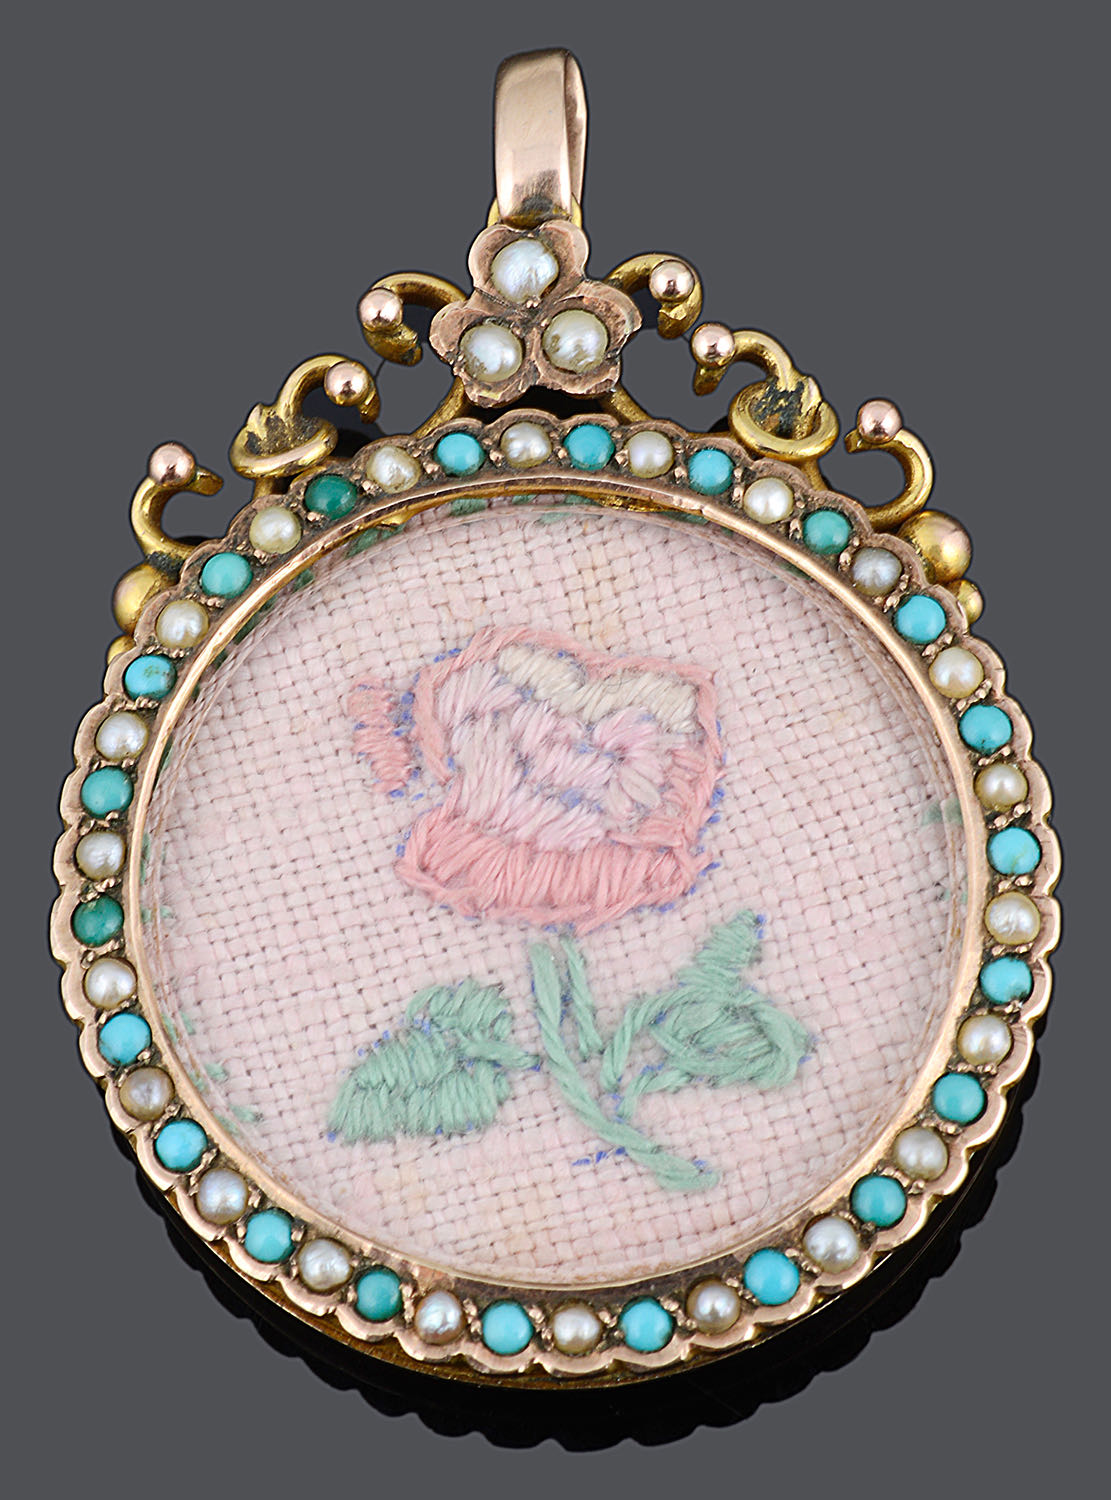 An attractive Victorian seed pearl and turquoise set pendant picture locket